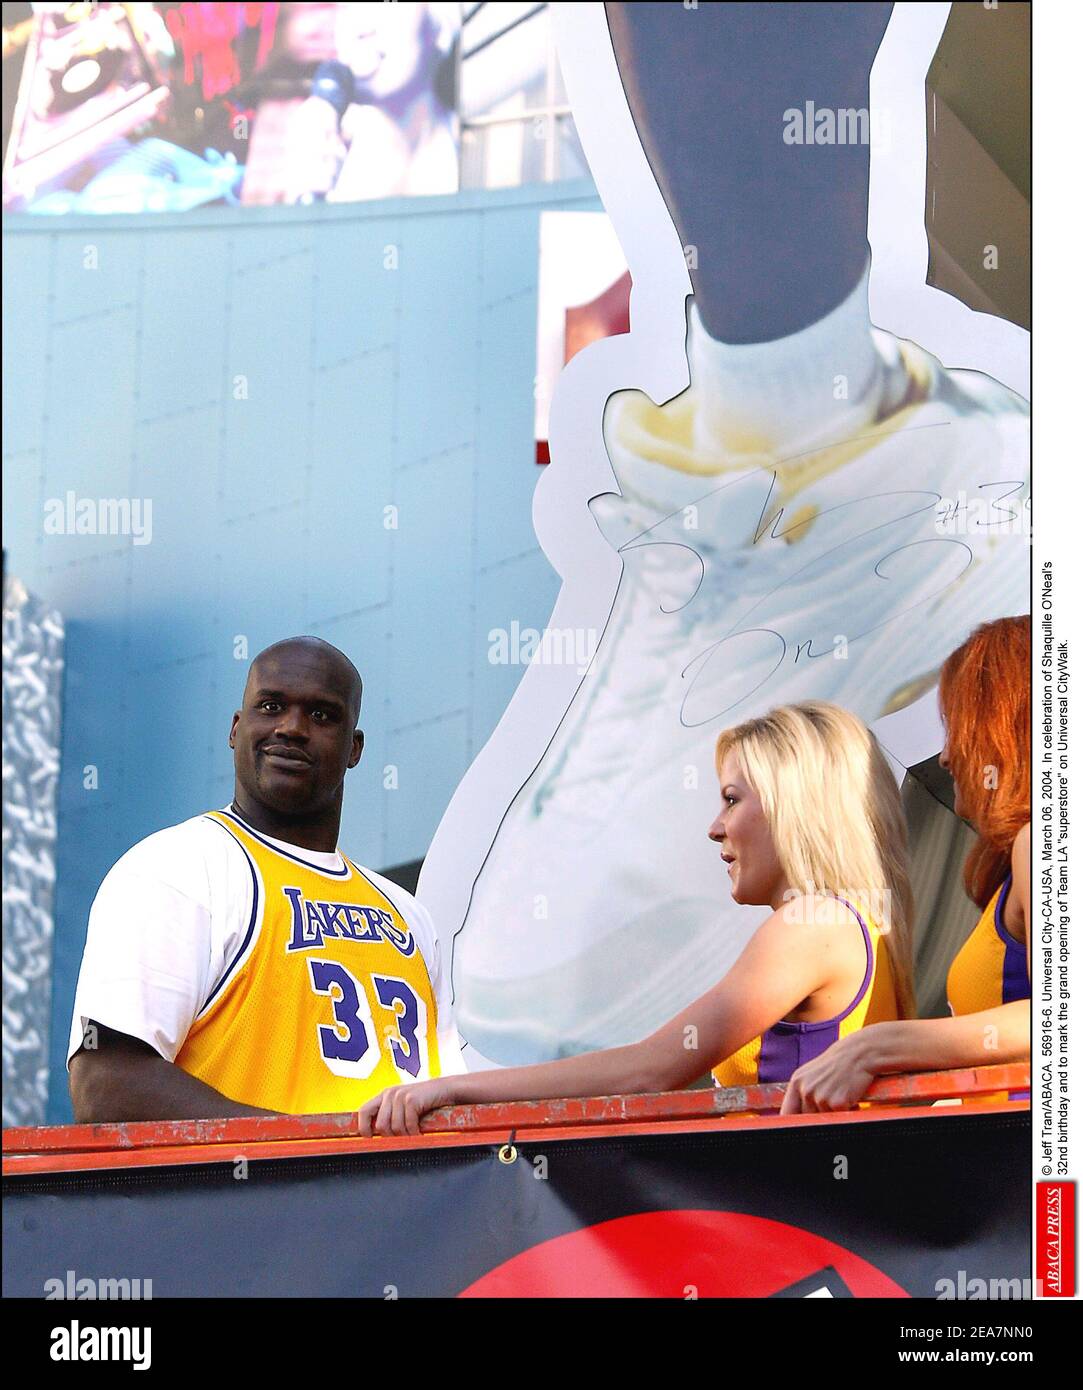 © Jeff Tran/ABACA. 56916-6. Universal City-CA-USA, March 06, 2004. In celebration of Shaquille O'Neal's 32nd birthday and to mark the grand opening of Team LA superstore on Universal CityWalk, Shaquille unveils a 40 feet tall neon sign in his likeness sporting his famous number 34 Lakers Jersey. However, Shaquille attends the event wearing a Lakers Jersey number 33 which was once worn by a retired Lakers player, Kareem Abdul-Jabar. Stock Photo